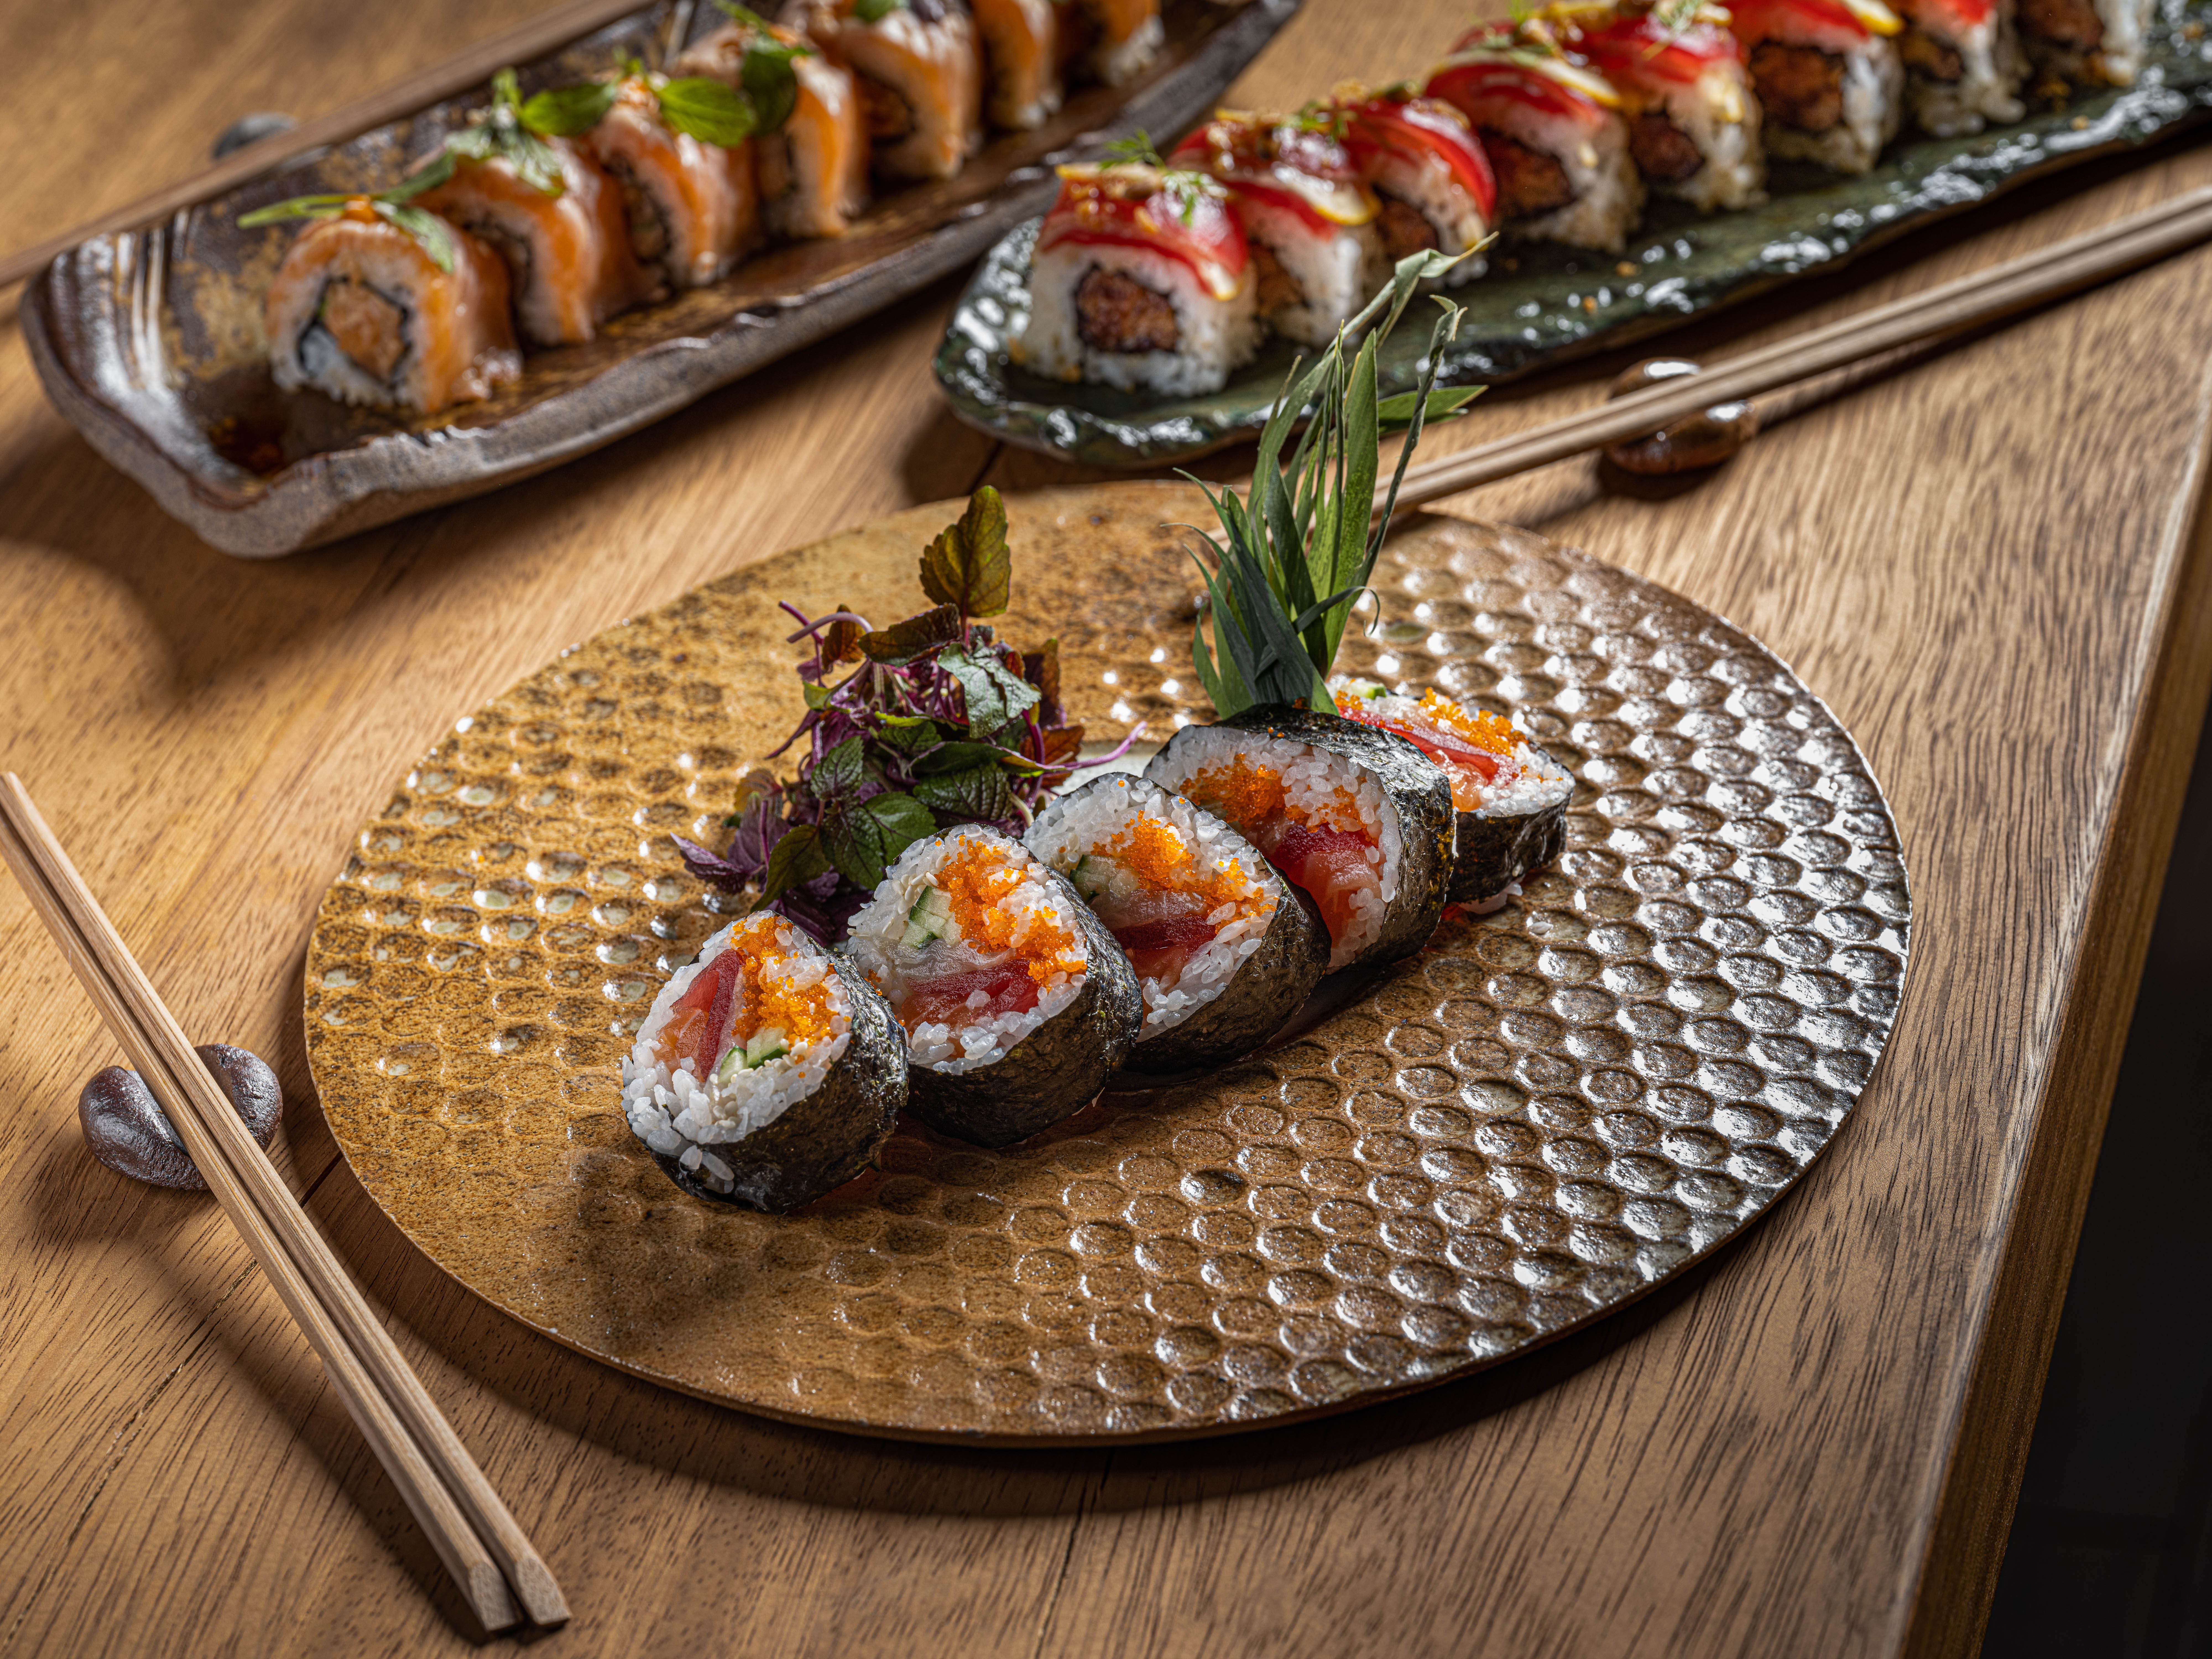 Spago by Wolfgang Puck Budapest Rolls out Spring Sushi Menu